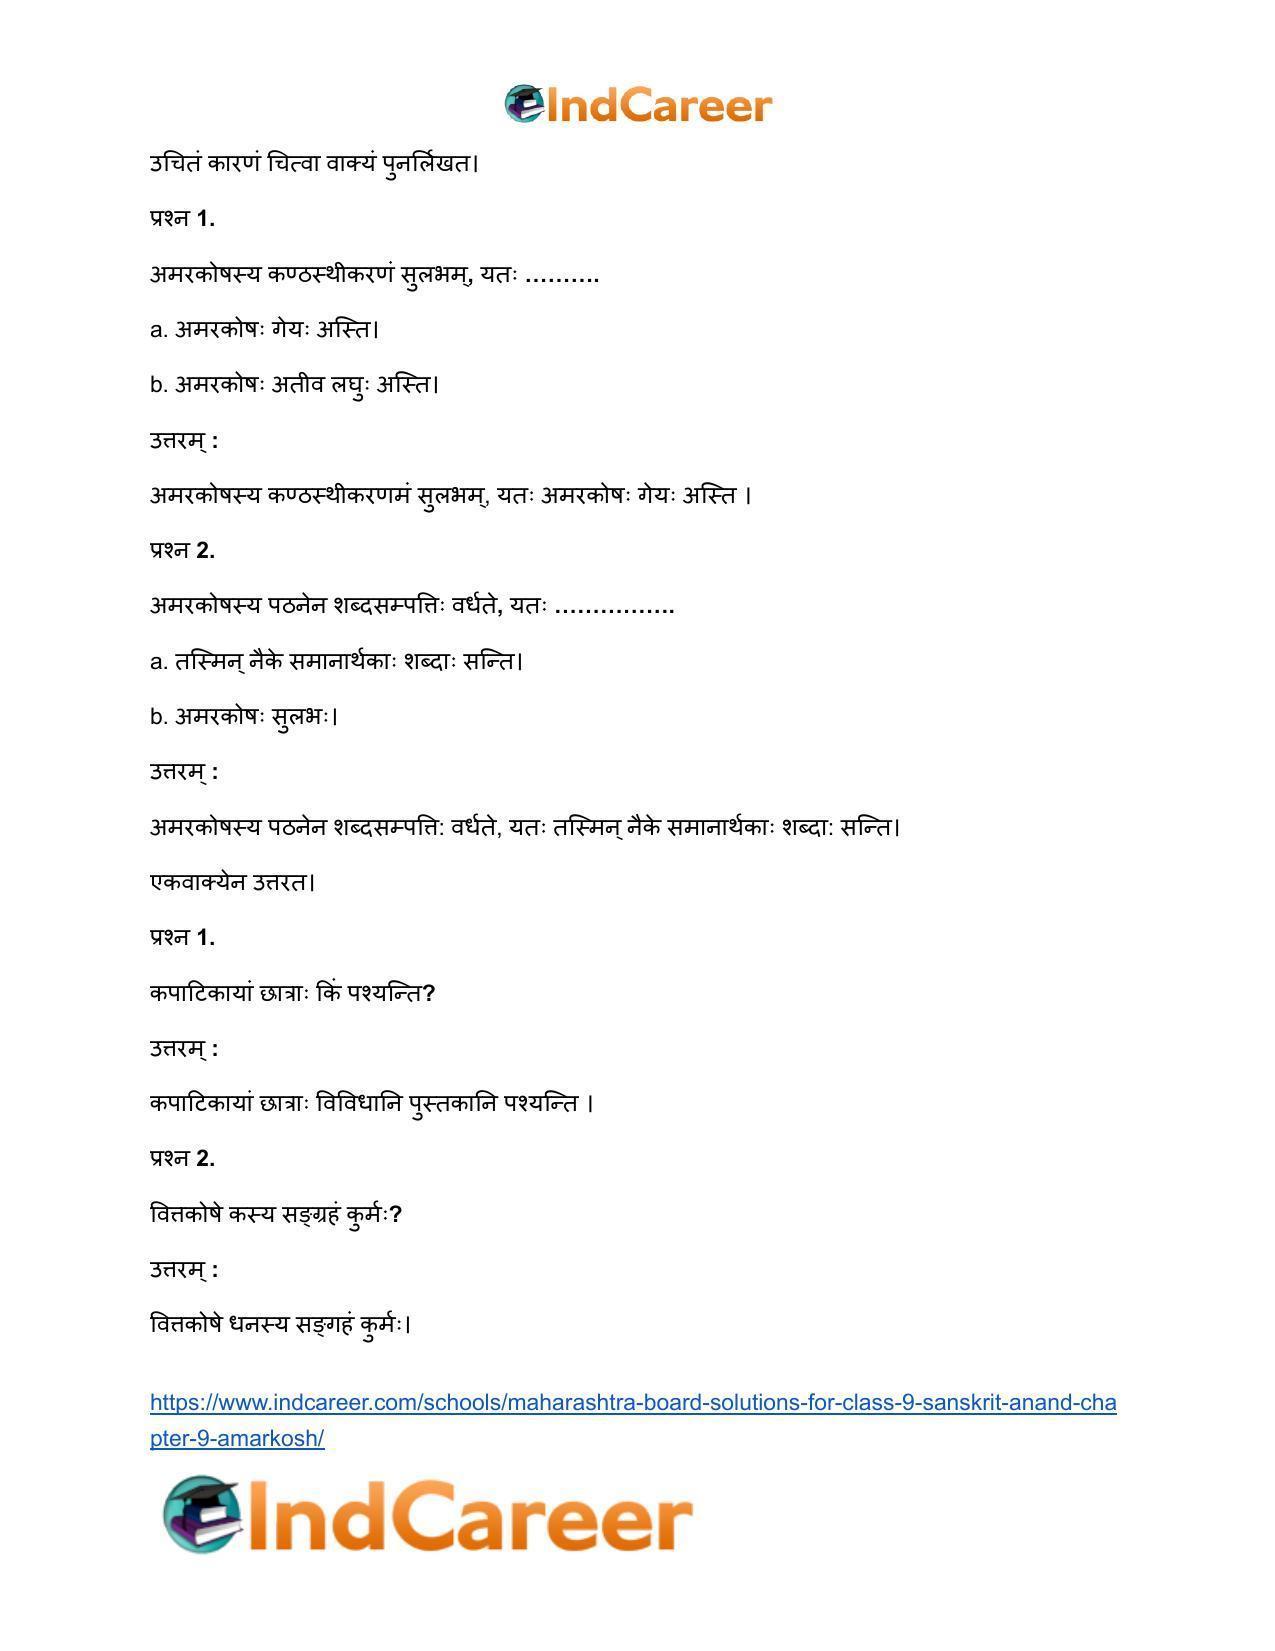 Maharashtra Board Solutions for Class 9- Sanskrit Anand: Chapter 9- अमरकोषः - Page 8